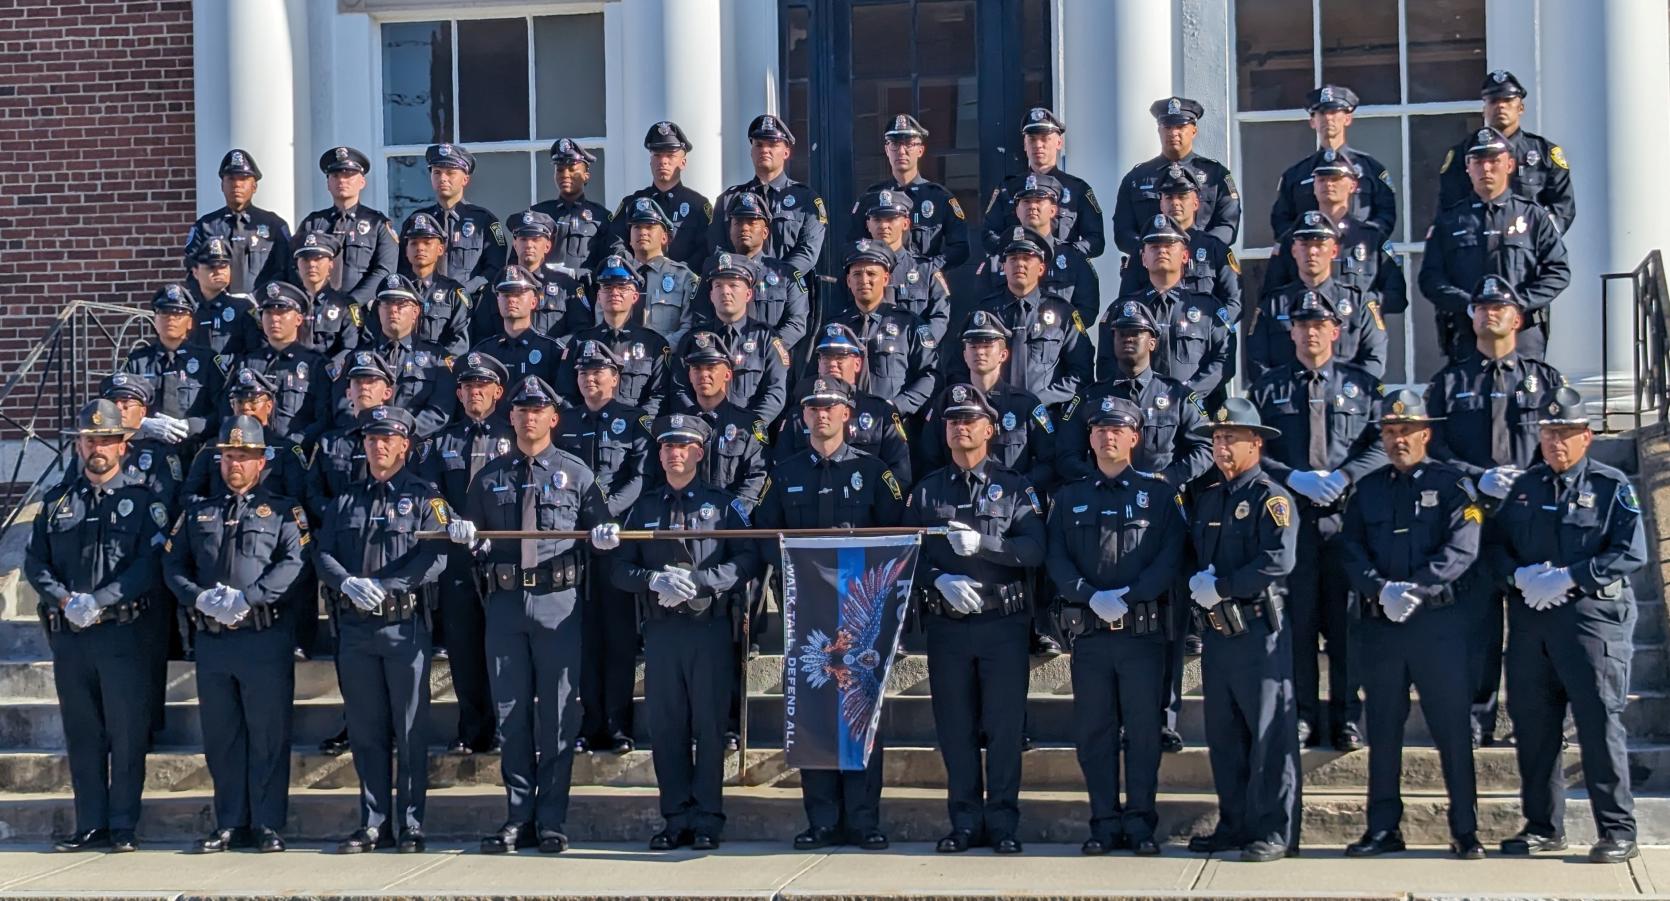 Student Officers and Staff Instructors from the MPTC Randolph Academy gathered at Norwood High School for the 18th Recruit Officer Class Graduation Ceremony. 